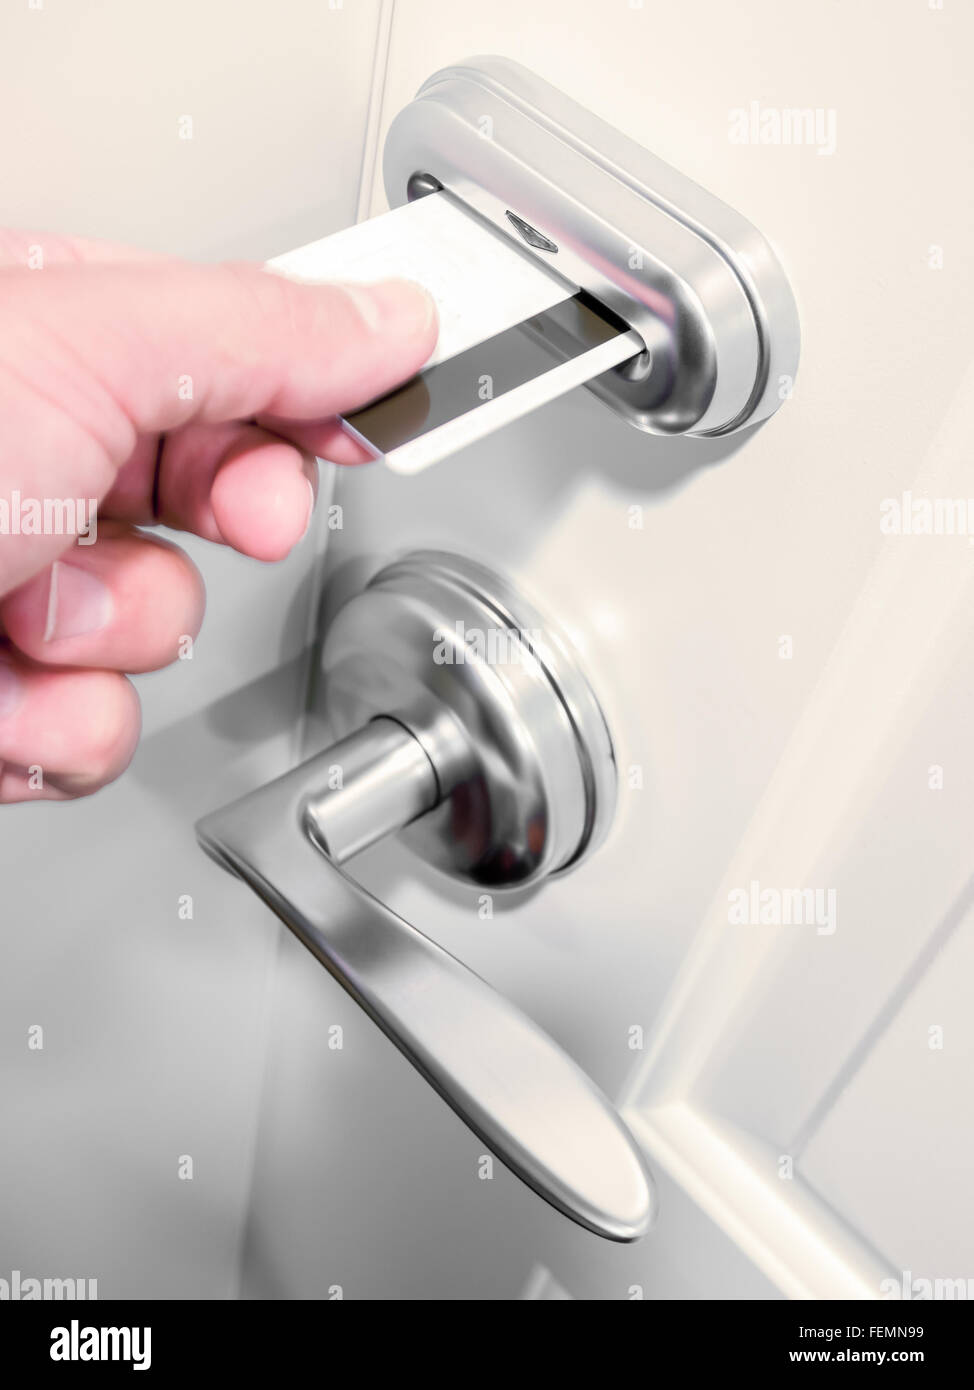 A person's hand unlocking an electronic keycard door lock on a hotel room. Stock Photo